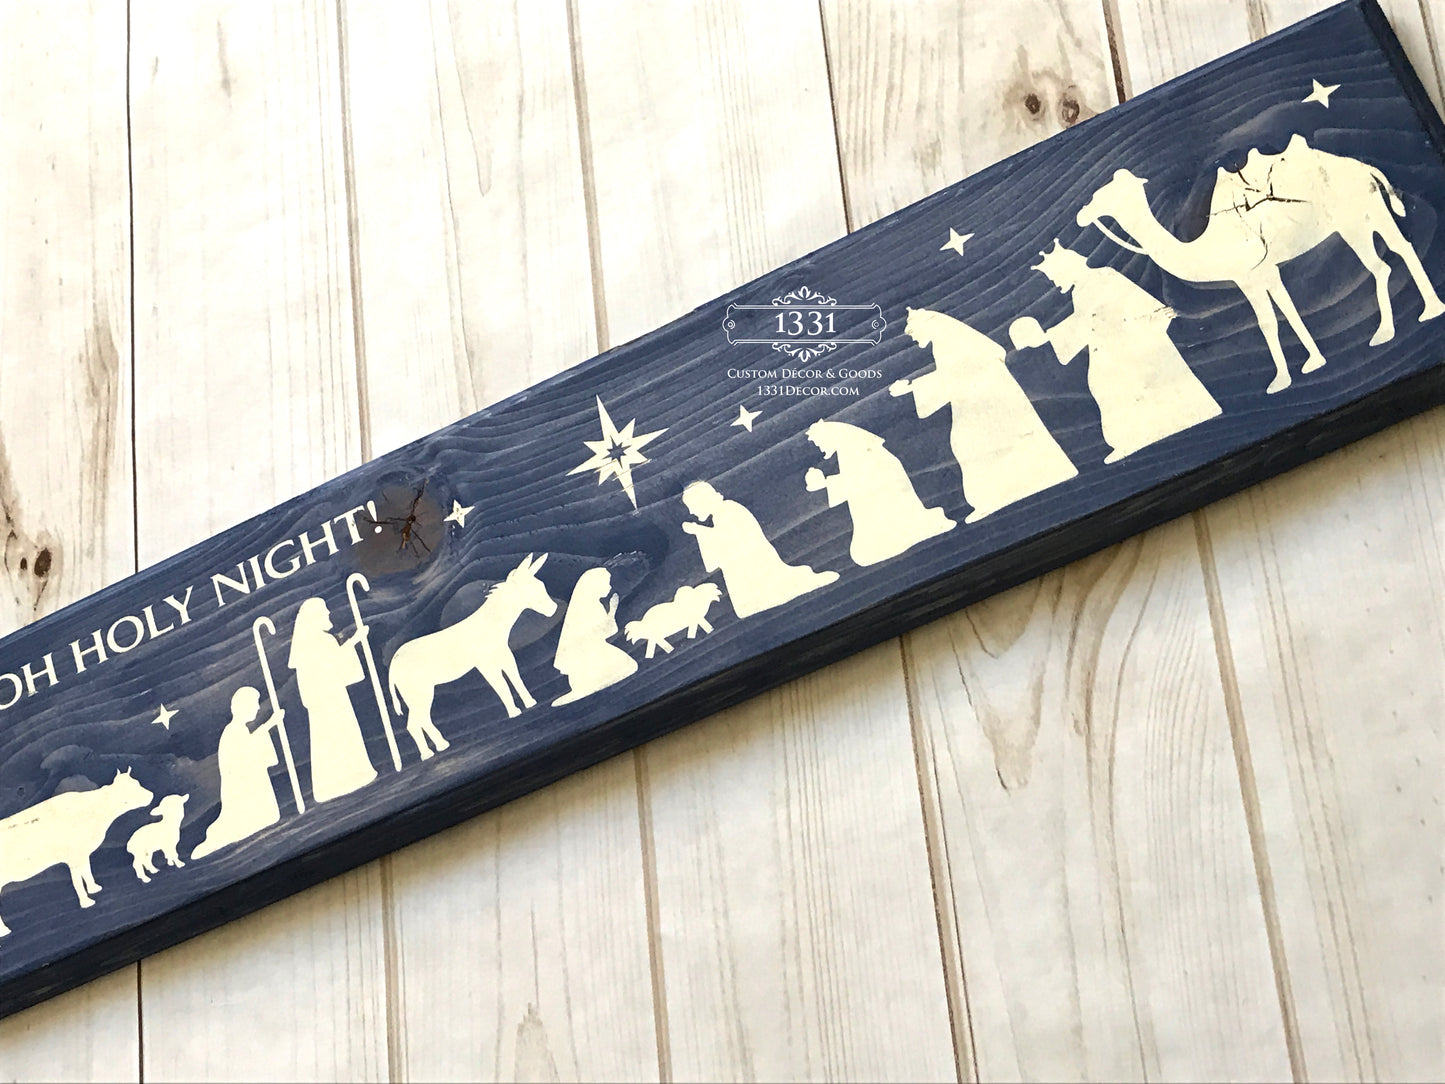 Nativity Sign, Oh Holy Night Sign, Christmas Sign, Religious Sign, Christmas Decor